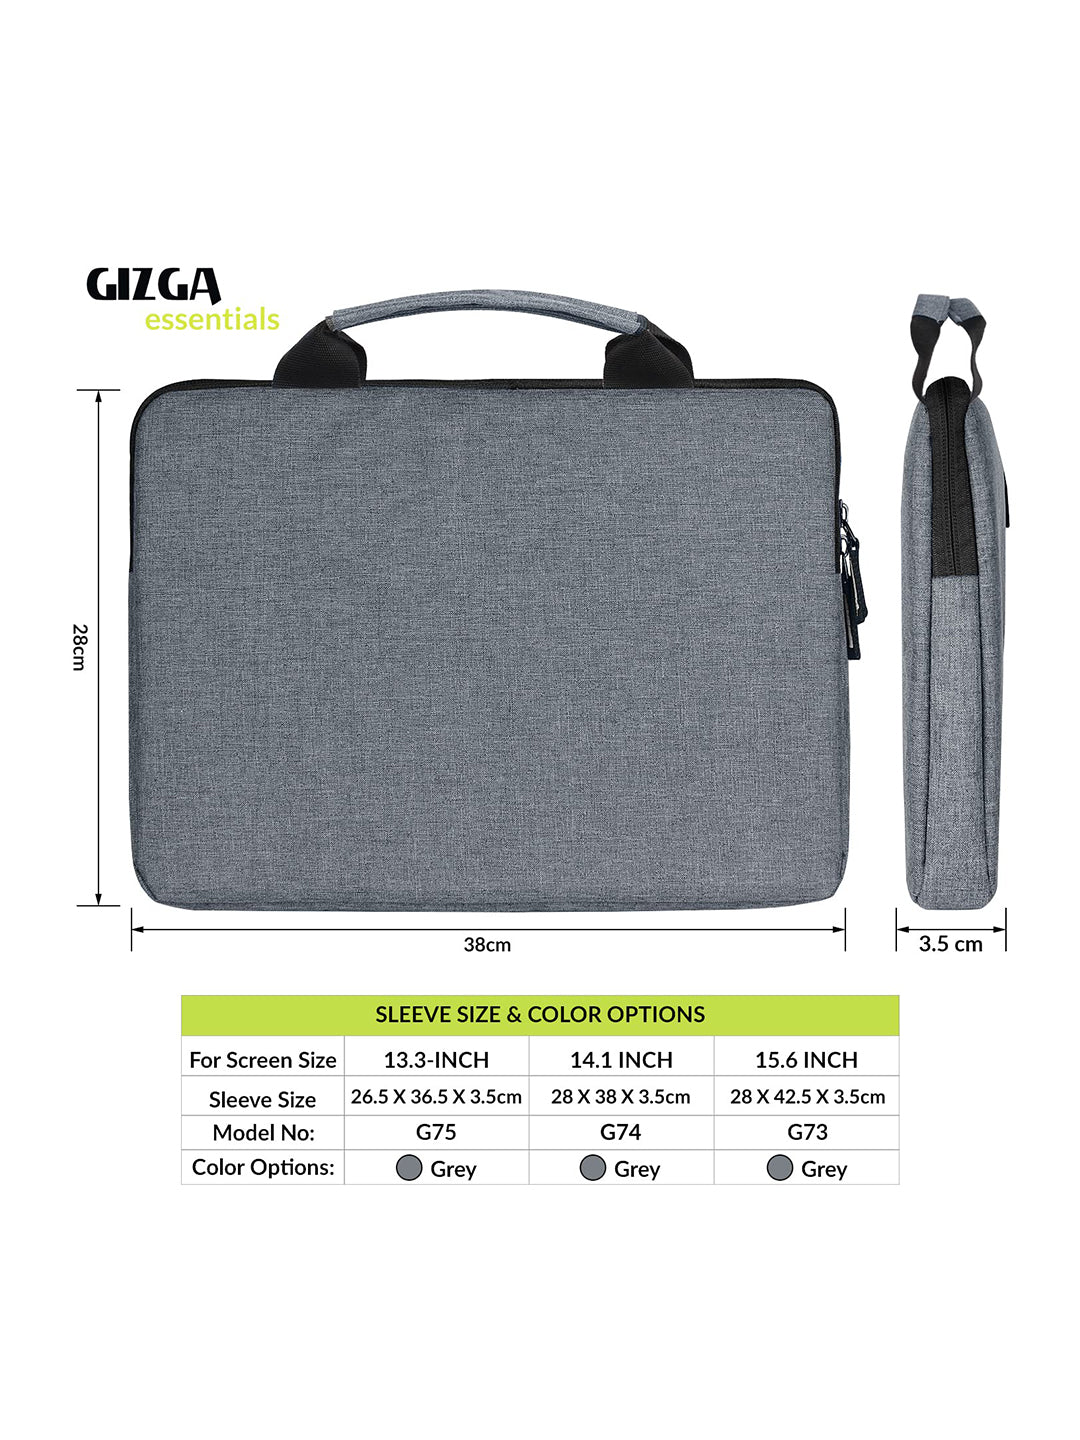 Gizga Essentials Laptop Bag Sleeve Case Cover for 14 Inch Laptop, with Handle